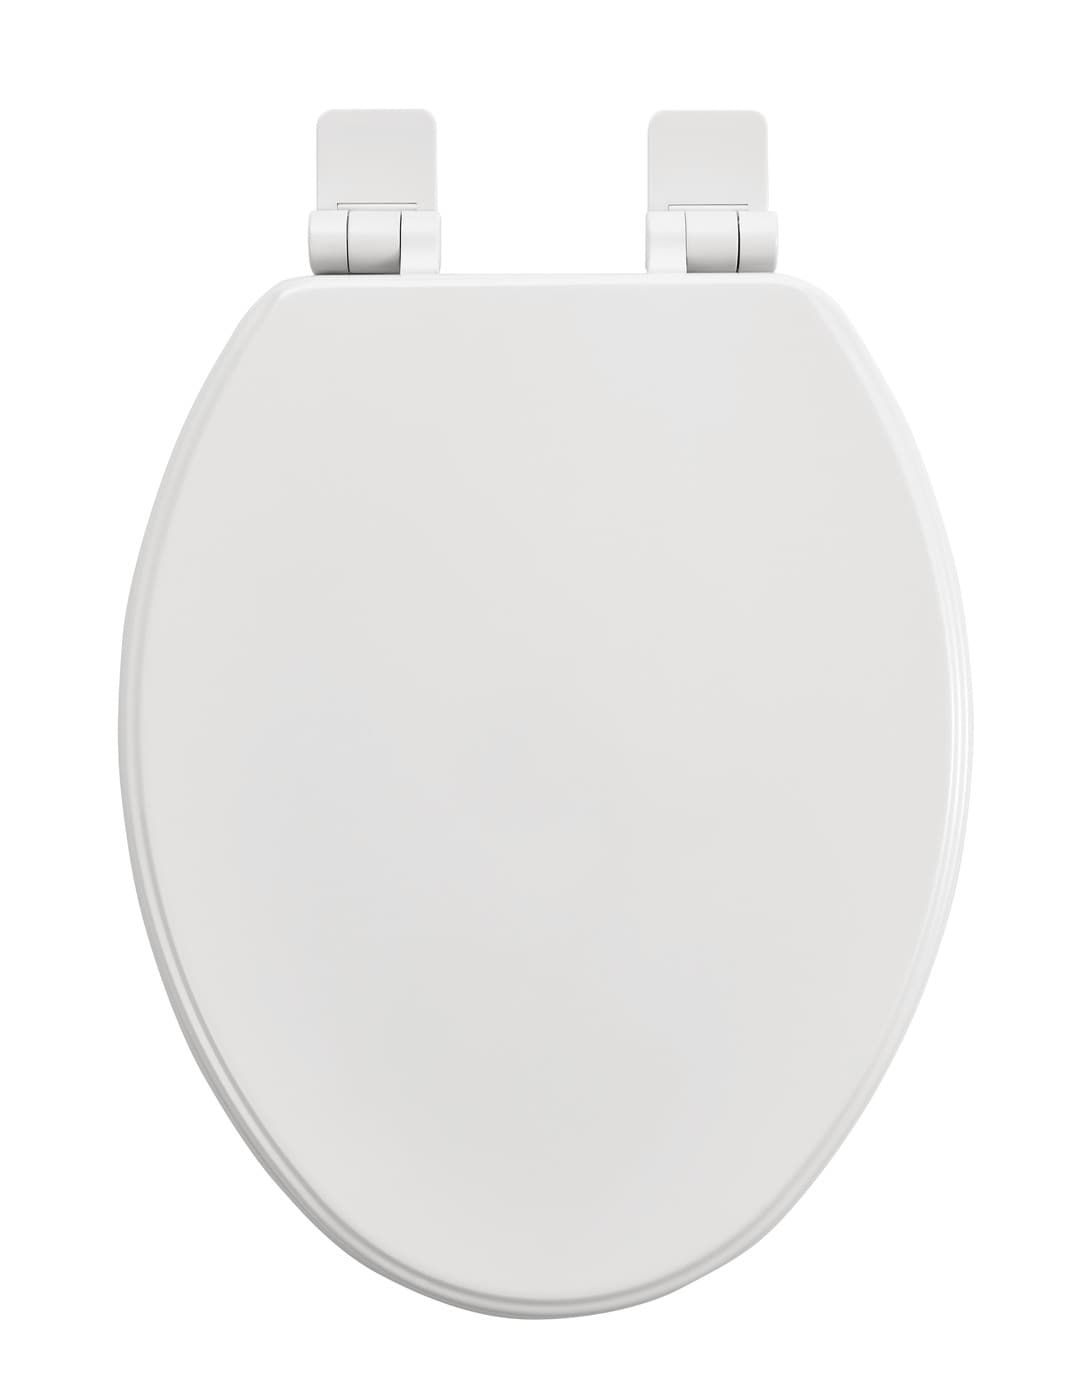 Quiet-Close with Grip-Tight Bumpers, SAMETU Elongated Toilet Seat with Cover 